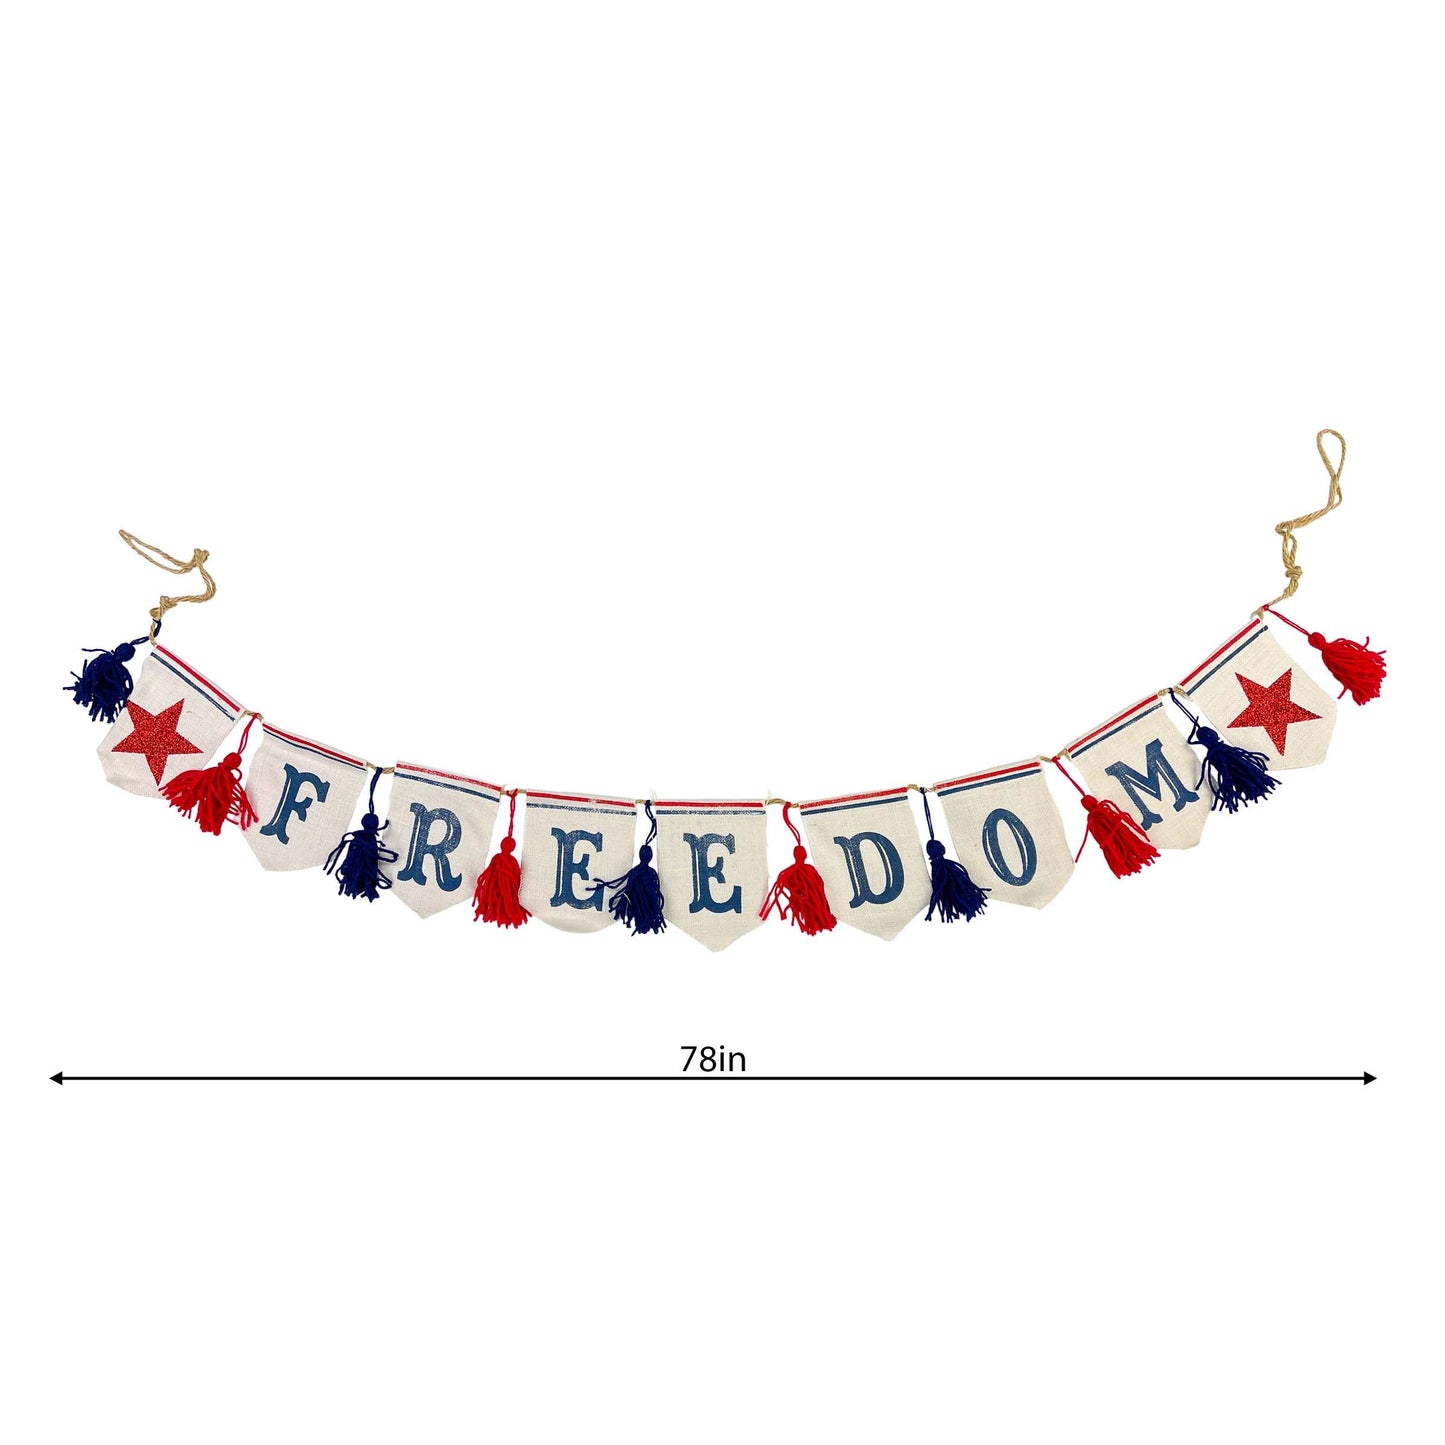 Freedom Hanging Banner  Patriotic American Flag Wall Decor for 4th of July Holidays